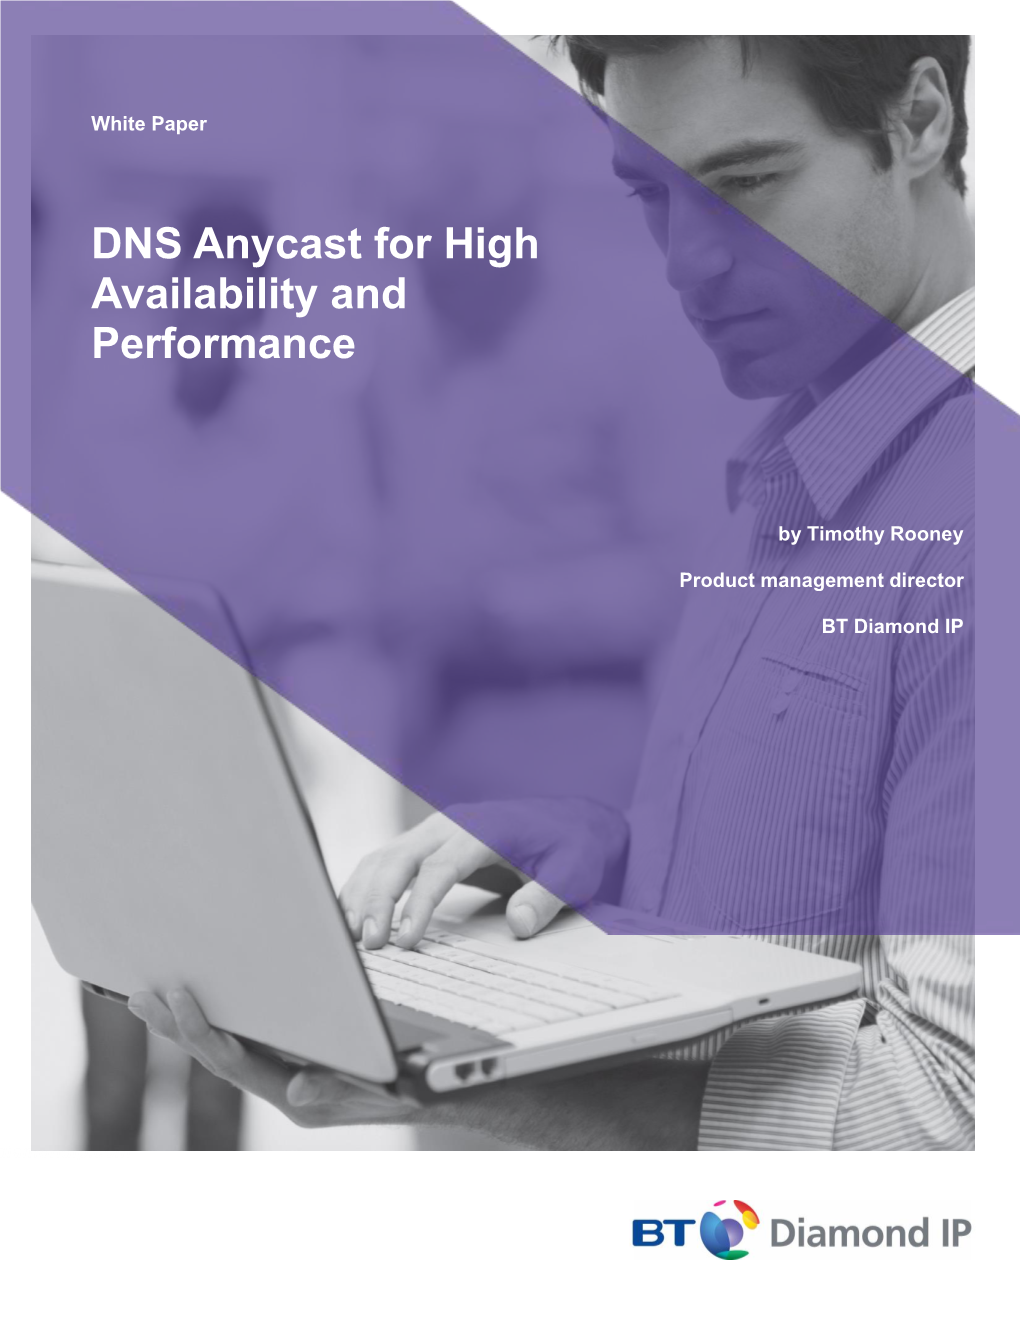 DNS Anycast for High Availability and Performance DNS Anycast Addressing for High Availability and by Timothy Rooney Performance Product Management Director